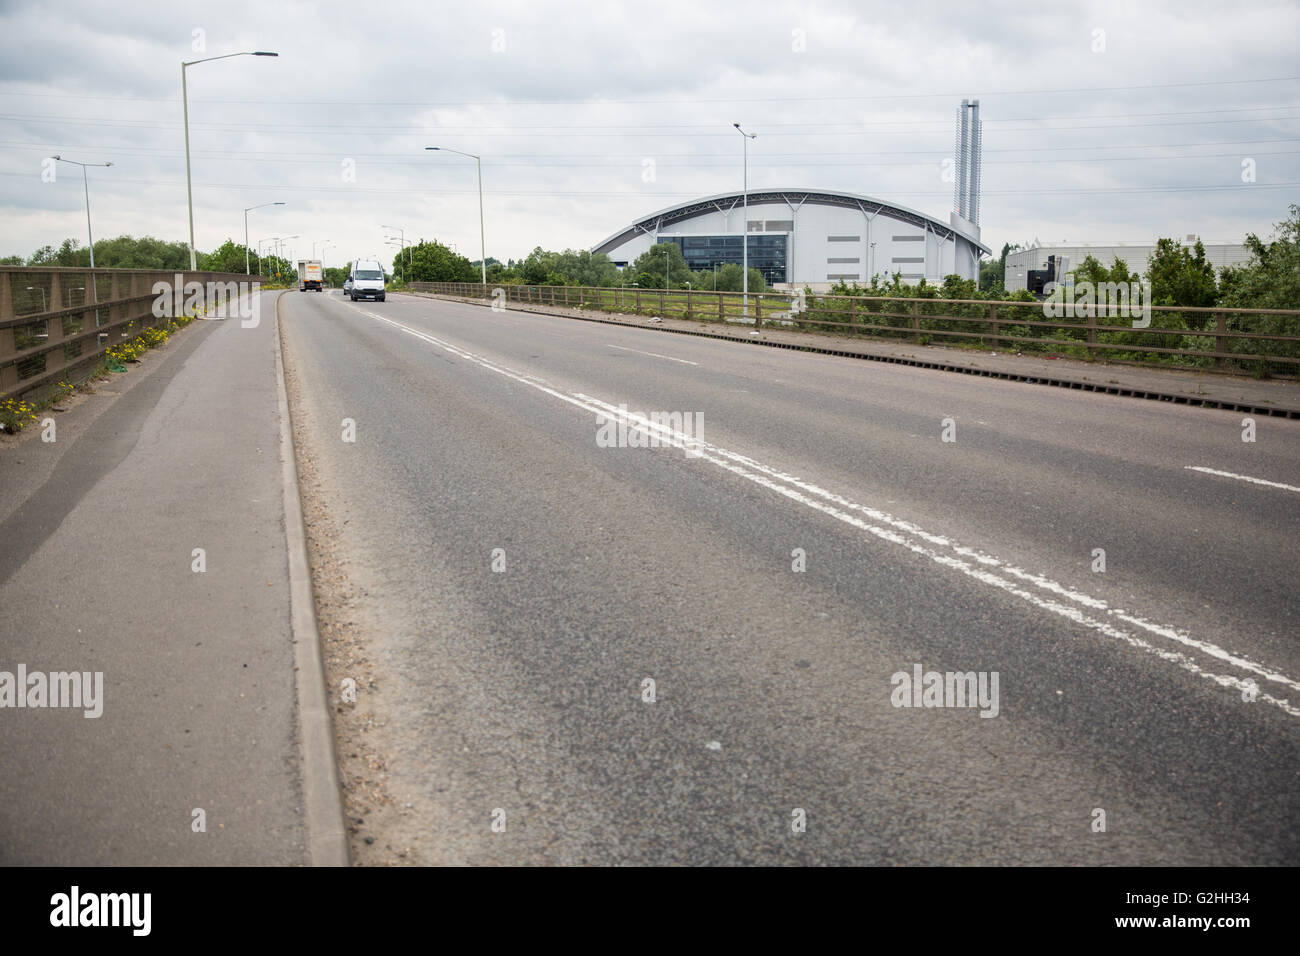 Harmondsworth, UK. 30th May, 2016. The A4 passes the Lakeside energy from waste (EfW) plant in Colnbrook. Both the A4 and the plant would require relocation should plans for a 3rd Heathrow airport runway be approved. Credit:  Mark Kerrison/Alamy Live News Stock Photo